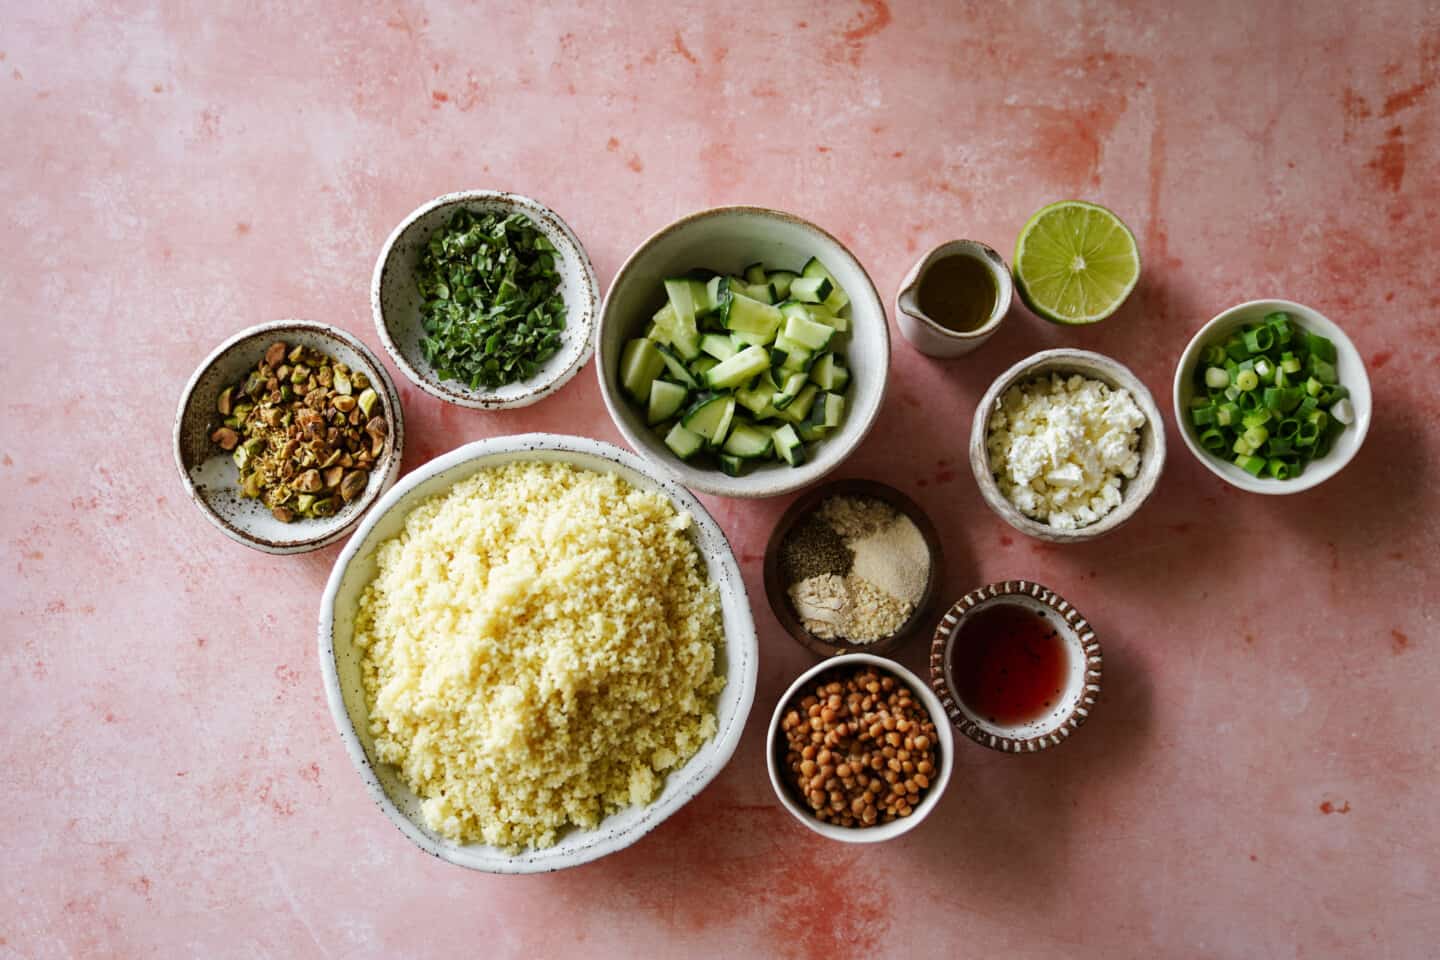 Ingredients for couscous recipe on a table